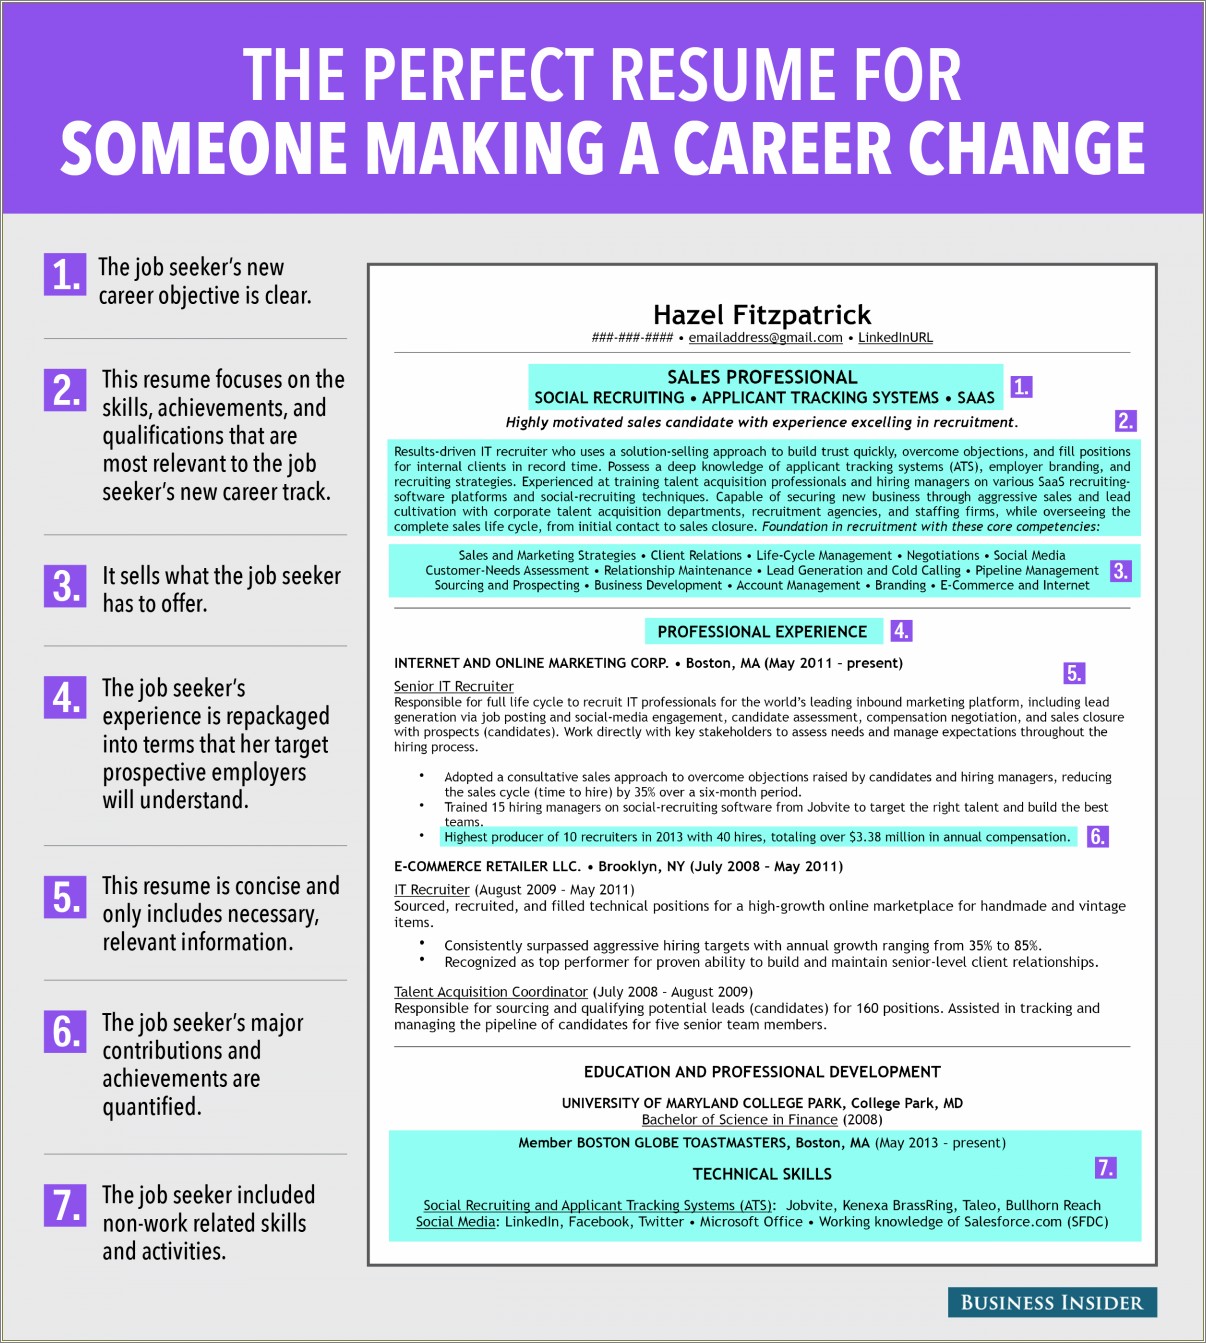 8 Things Not To Put On A Resume